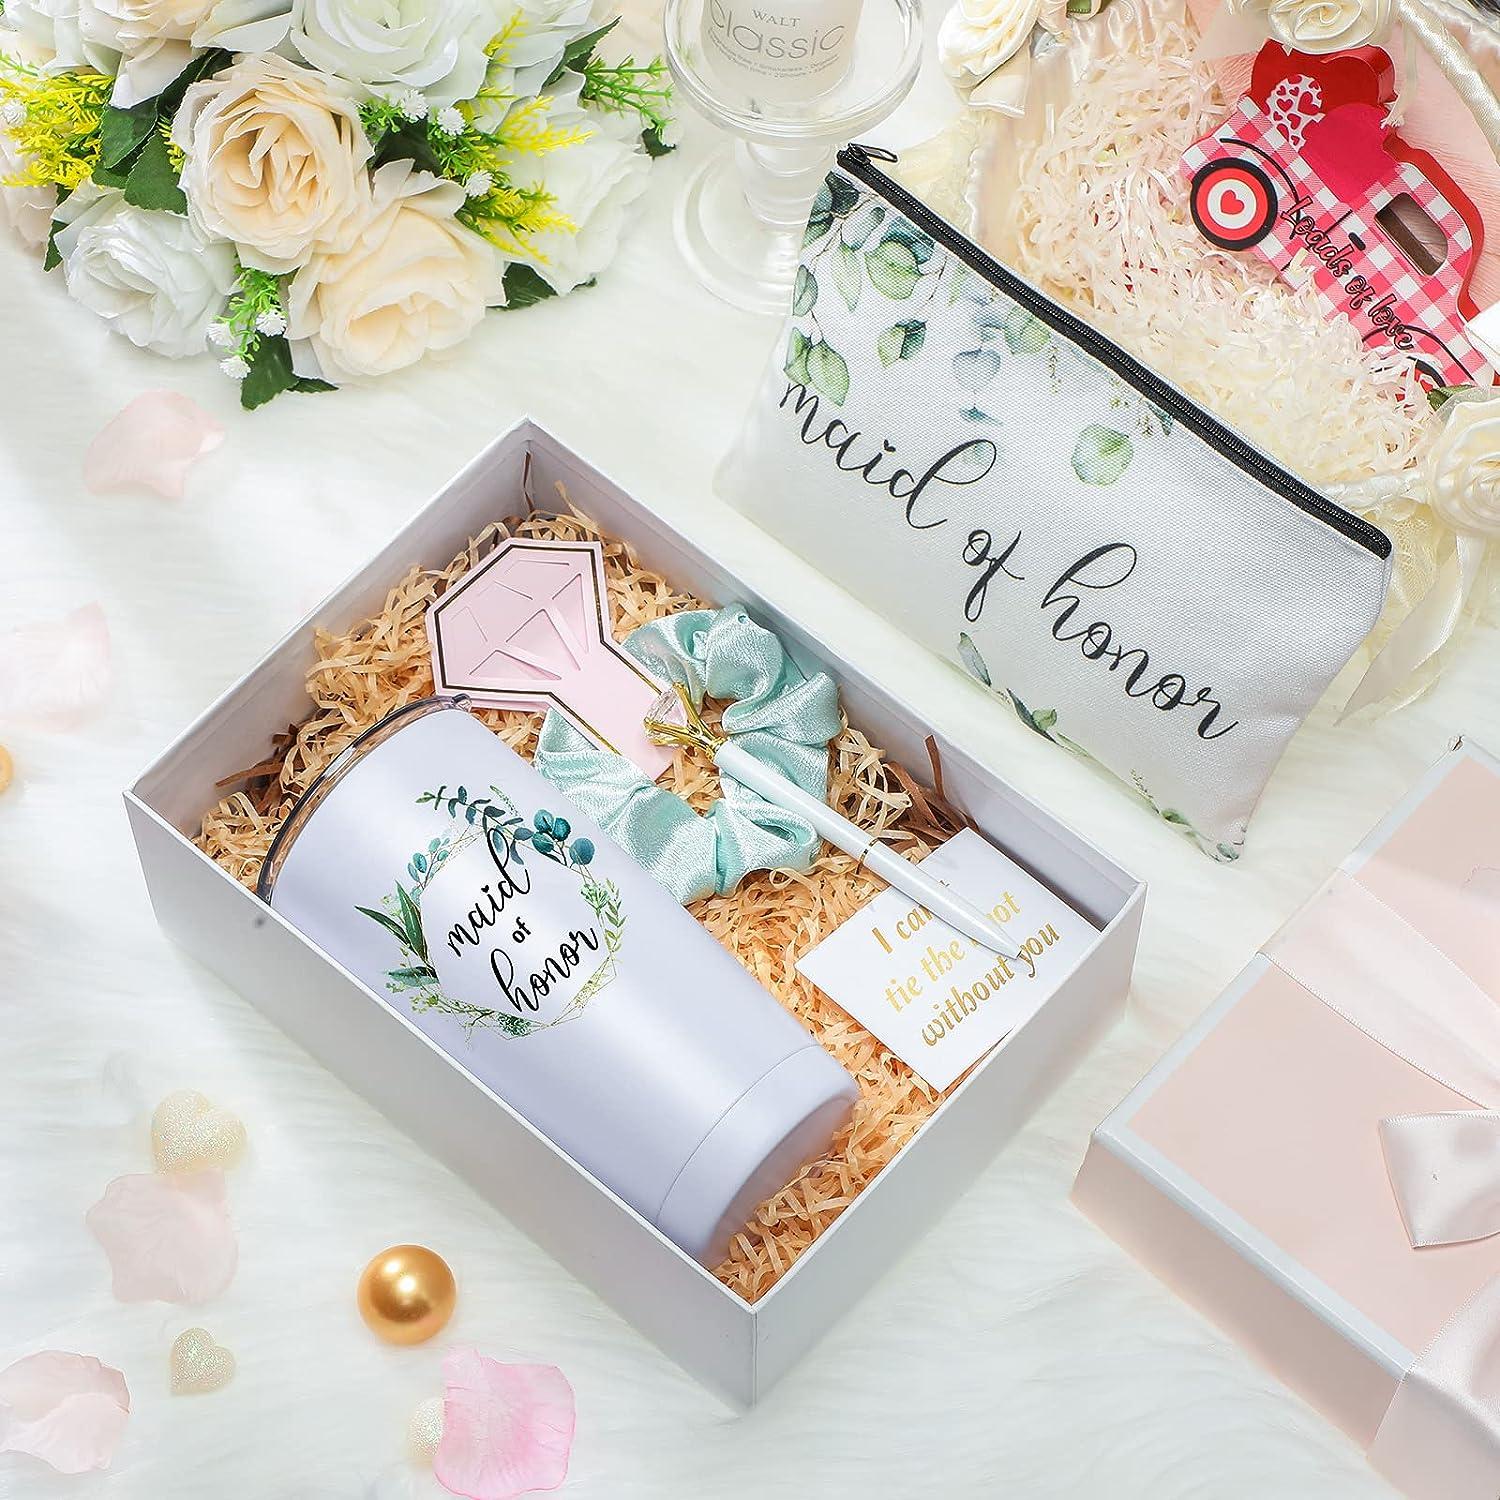 Amazon.com: HNSHAG Maid of Honor Proposal Gifts - Will You be My Maid of Honor  Gift Box - Bridesmaid Gifts for Wedding Bridal Party from Brides - Maid of  Honor Champagne Flutes